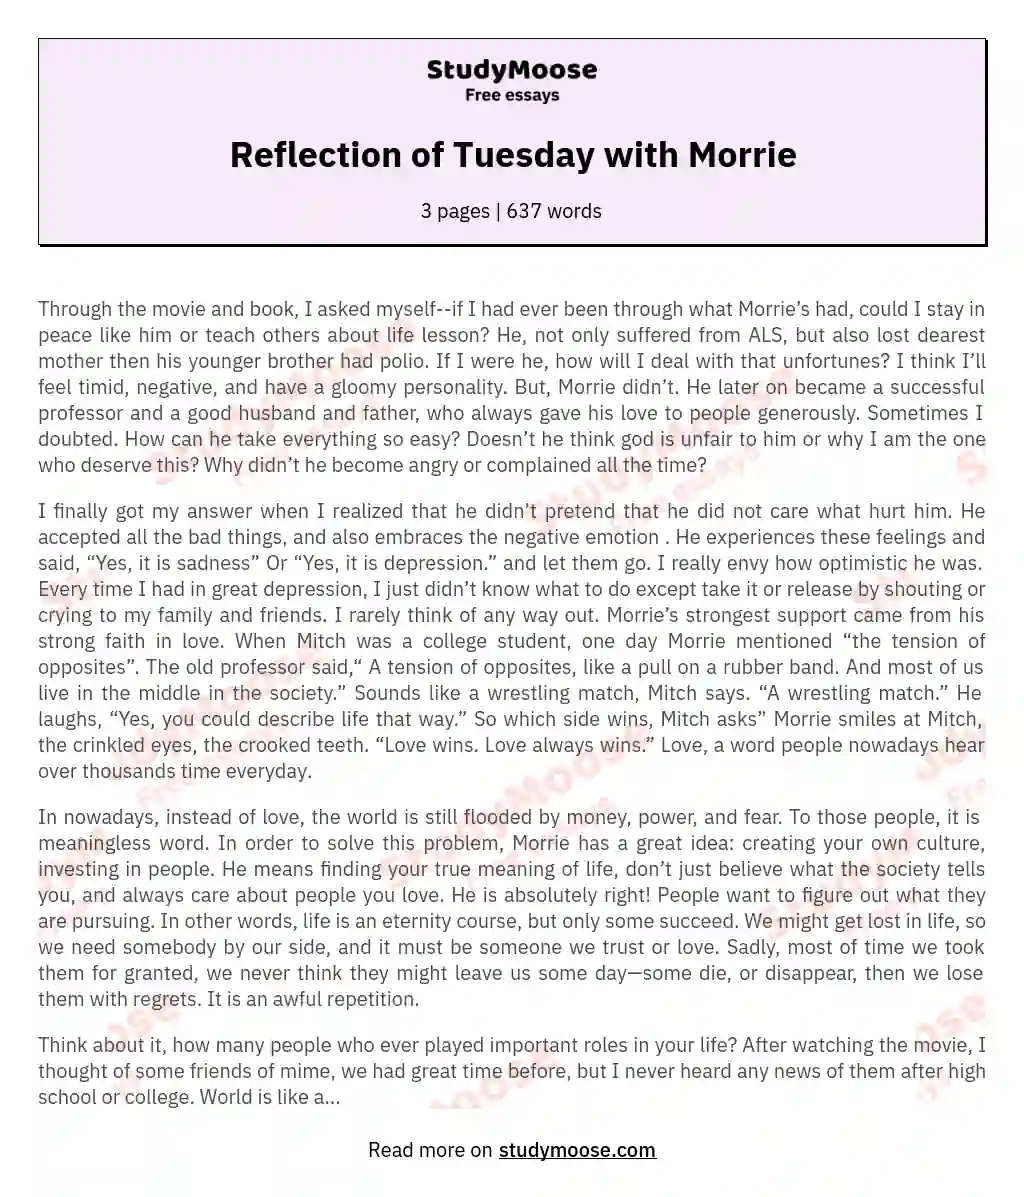 Reflection of Tuesday with Morrie essay